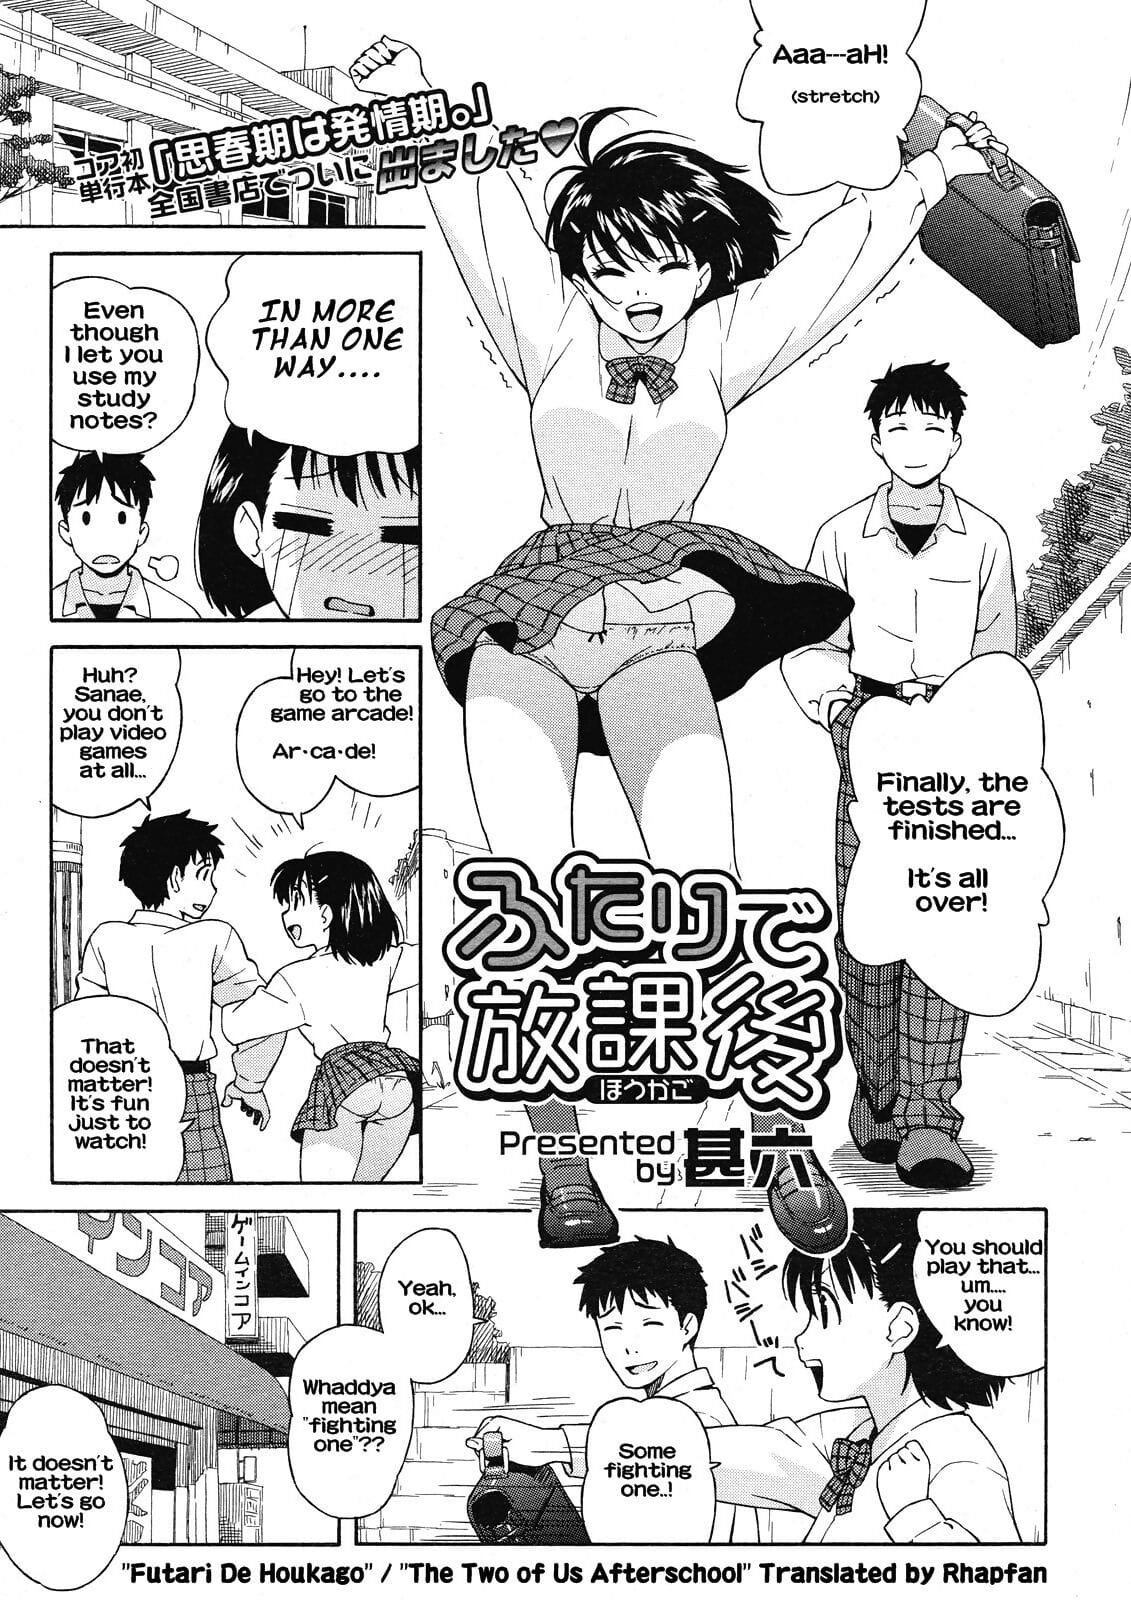 Futari de Houkago - The Two of Us After School page 1